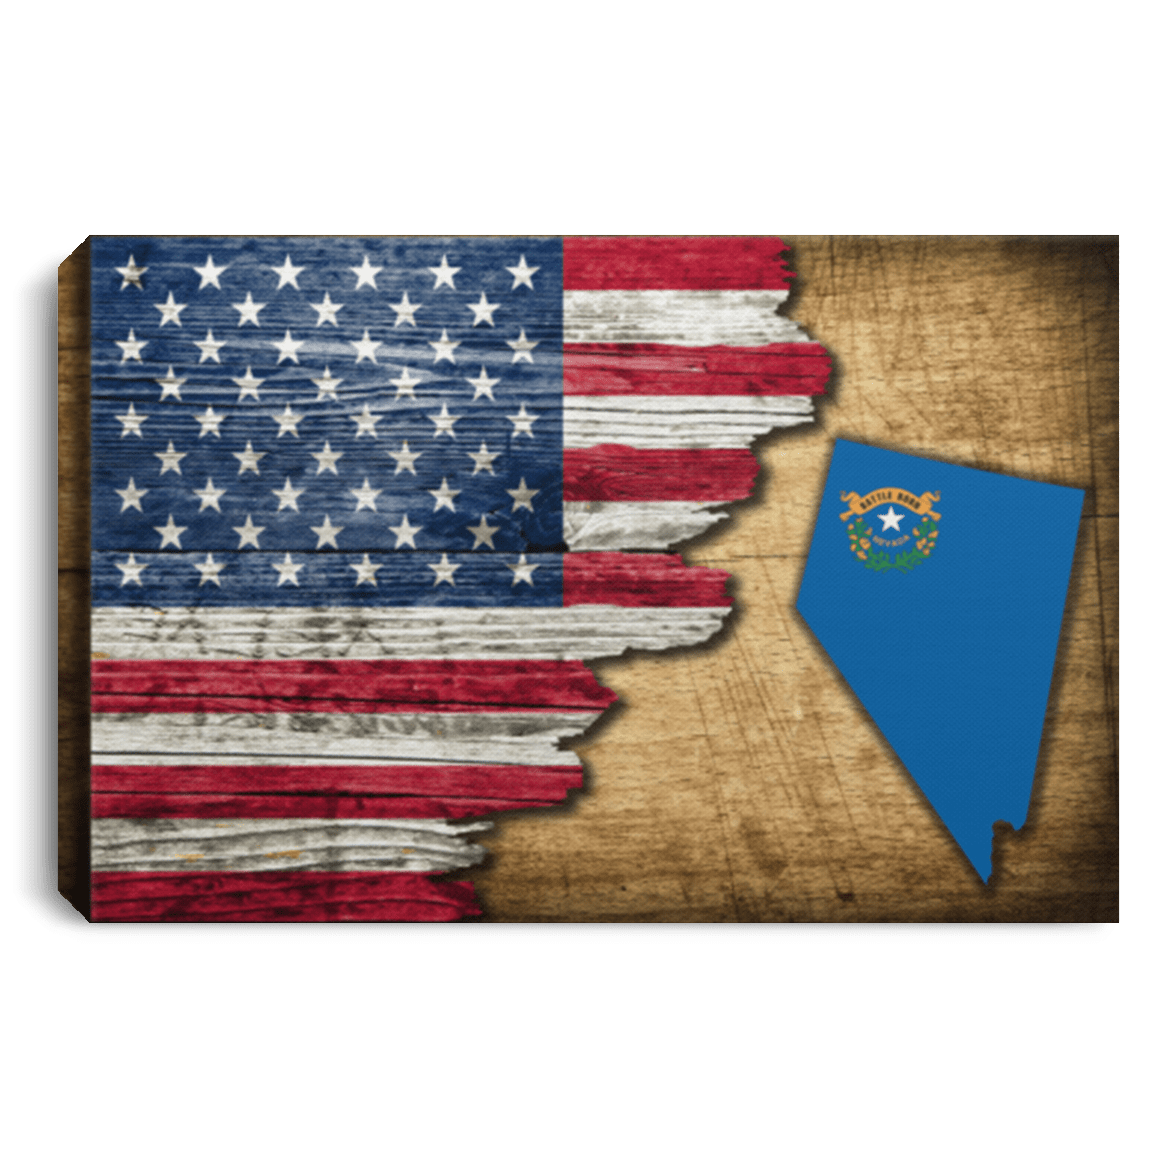 United States/Nevada Flag Ripped Effect 12X8 Inches Landscape Canvas .75In Frame